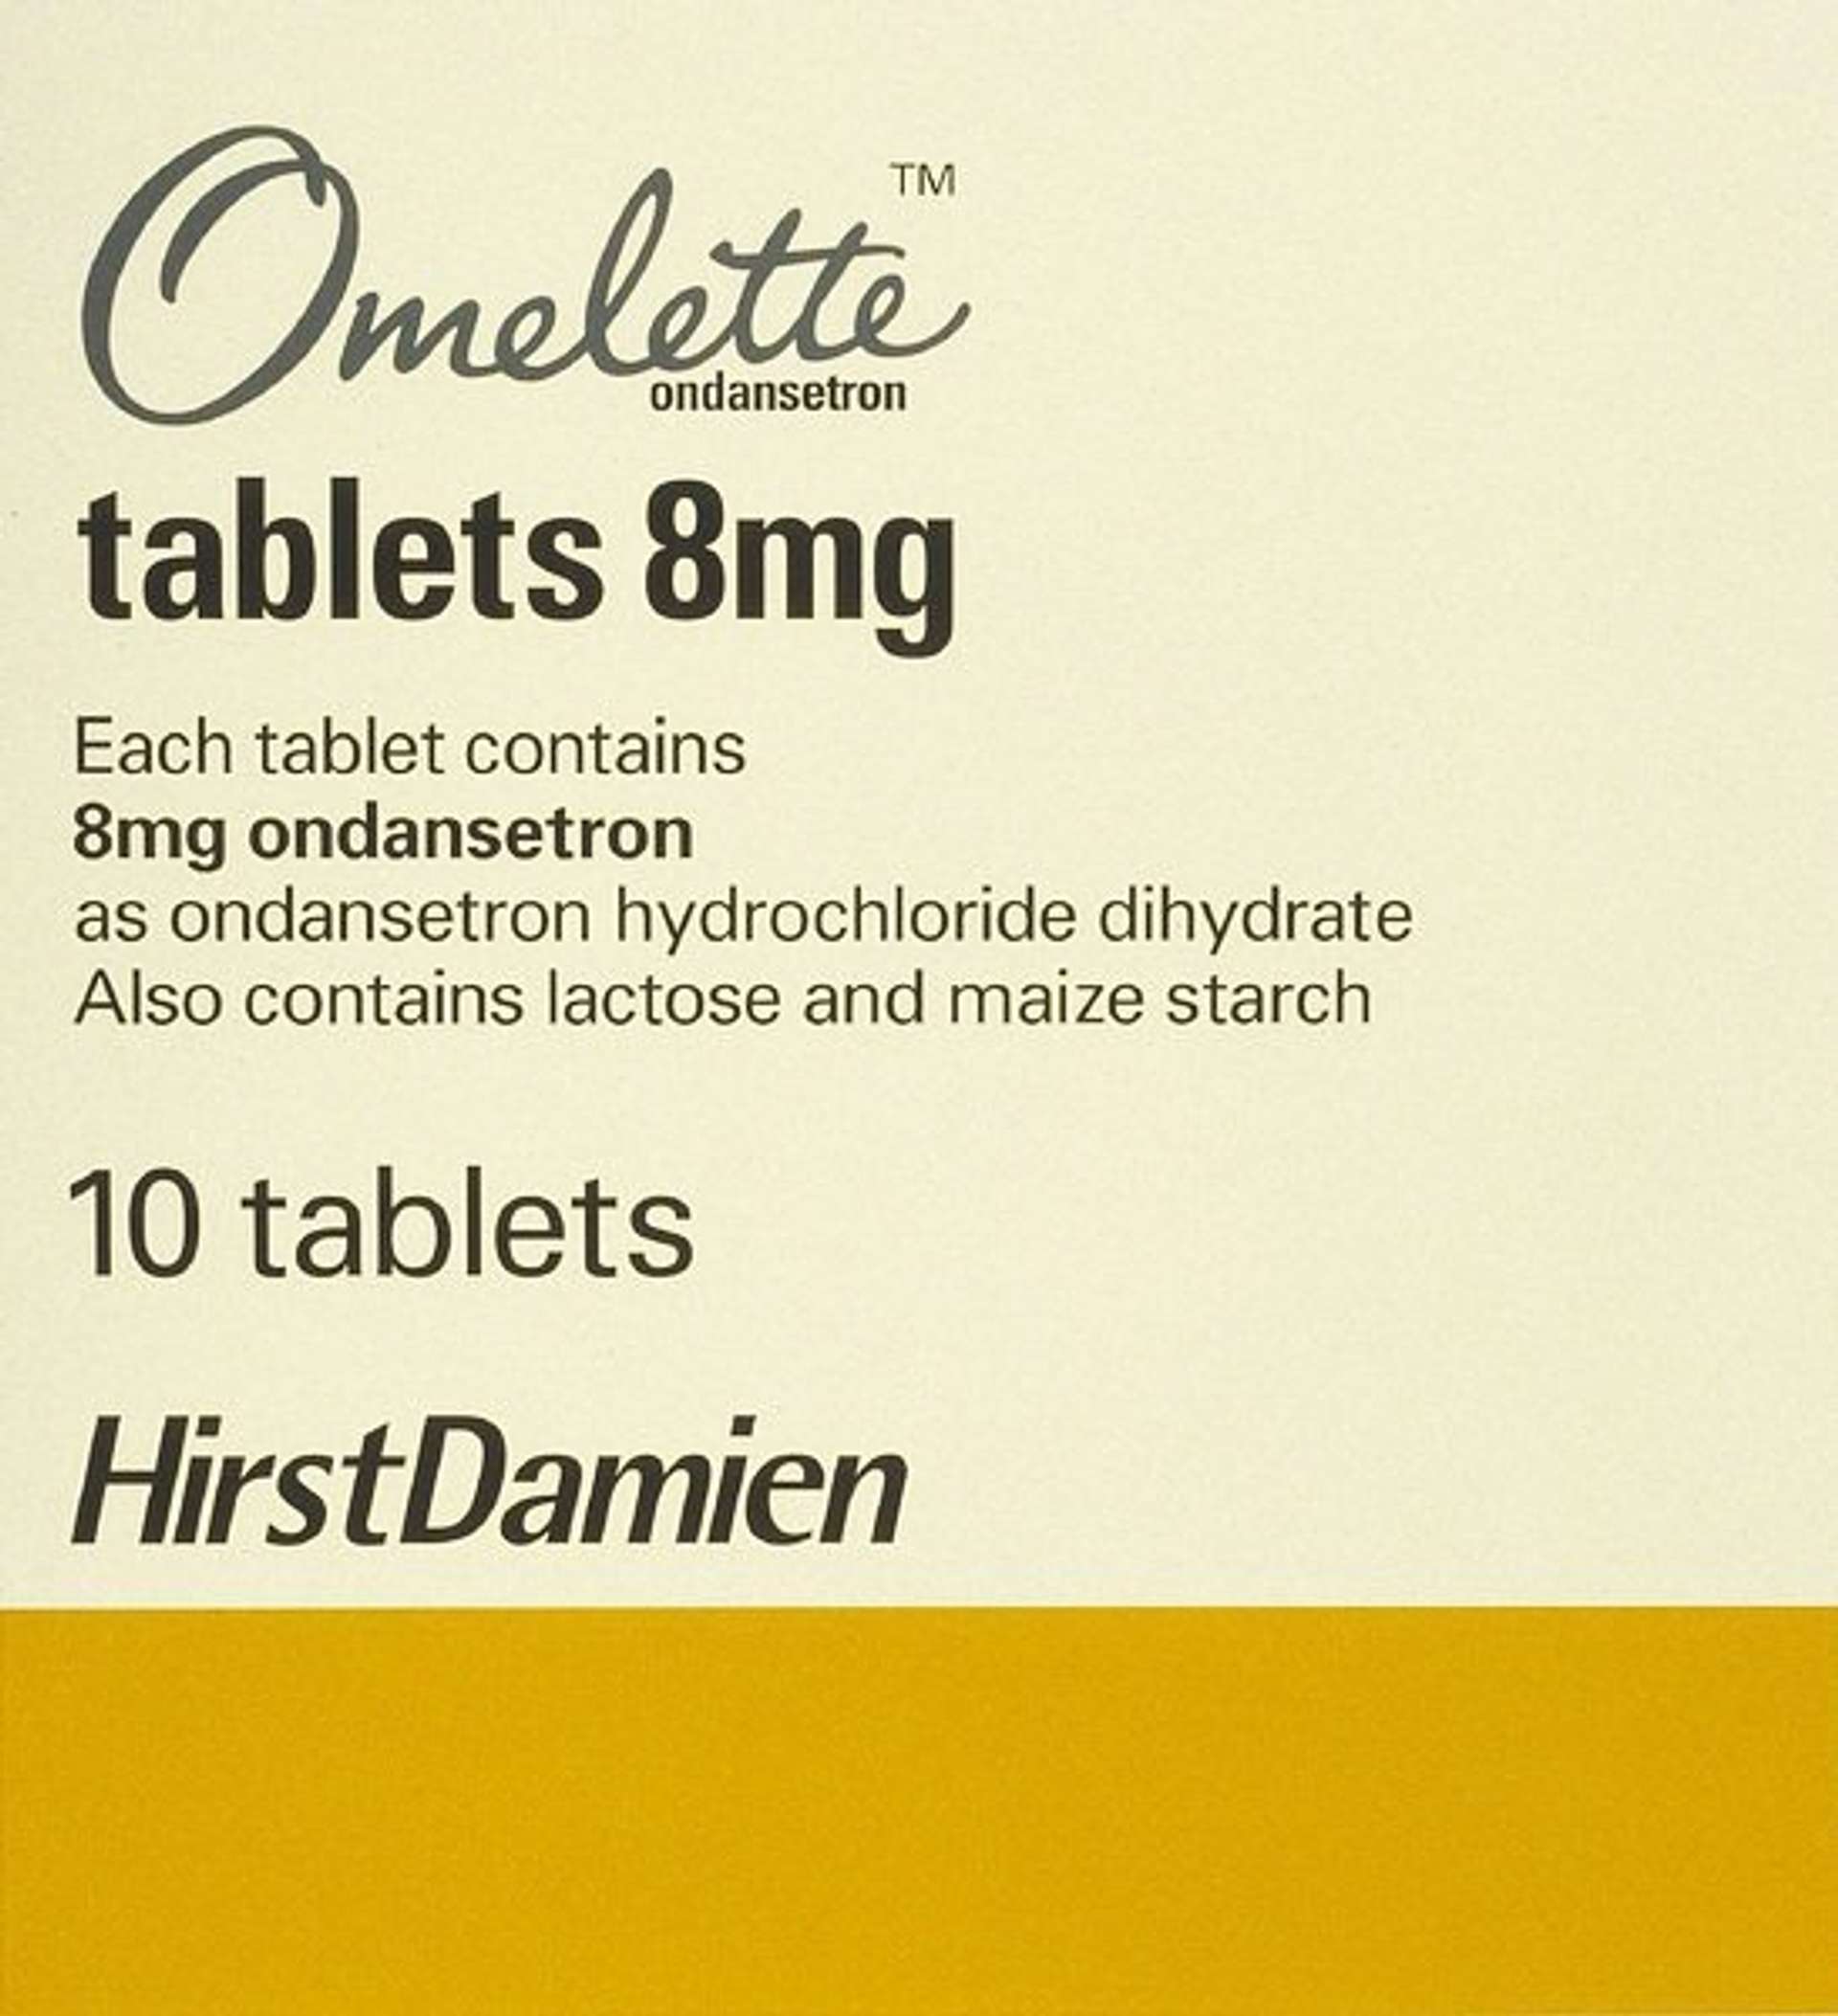 Damien Hirst's Omelette. A screenprint of a yellow pharmaceutical box with texts including the words "omelette tablets 8mmg".